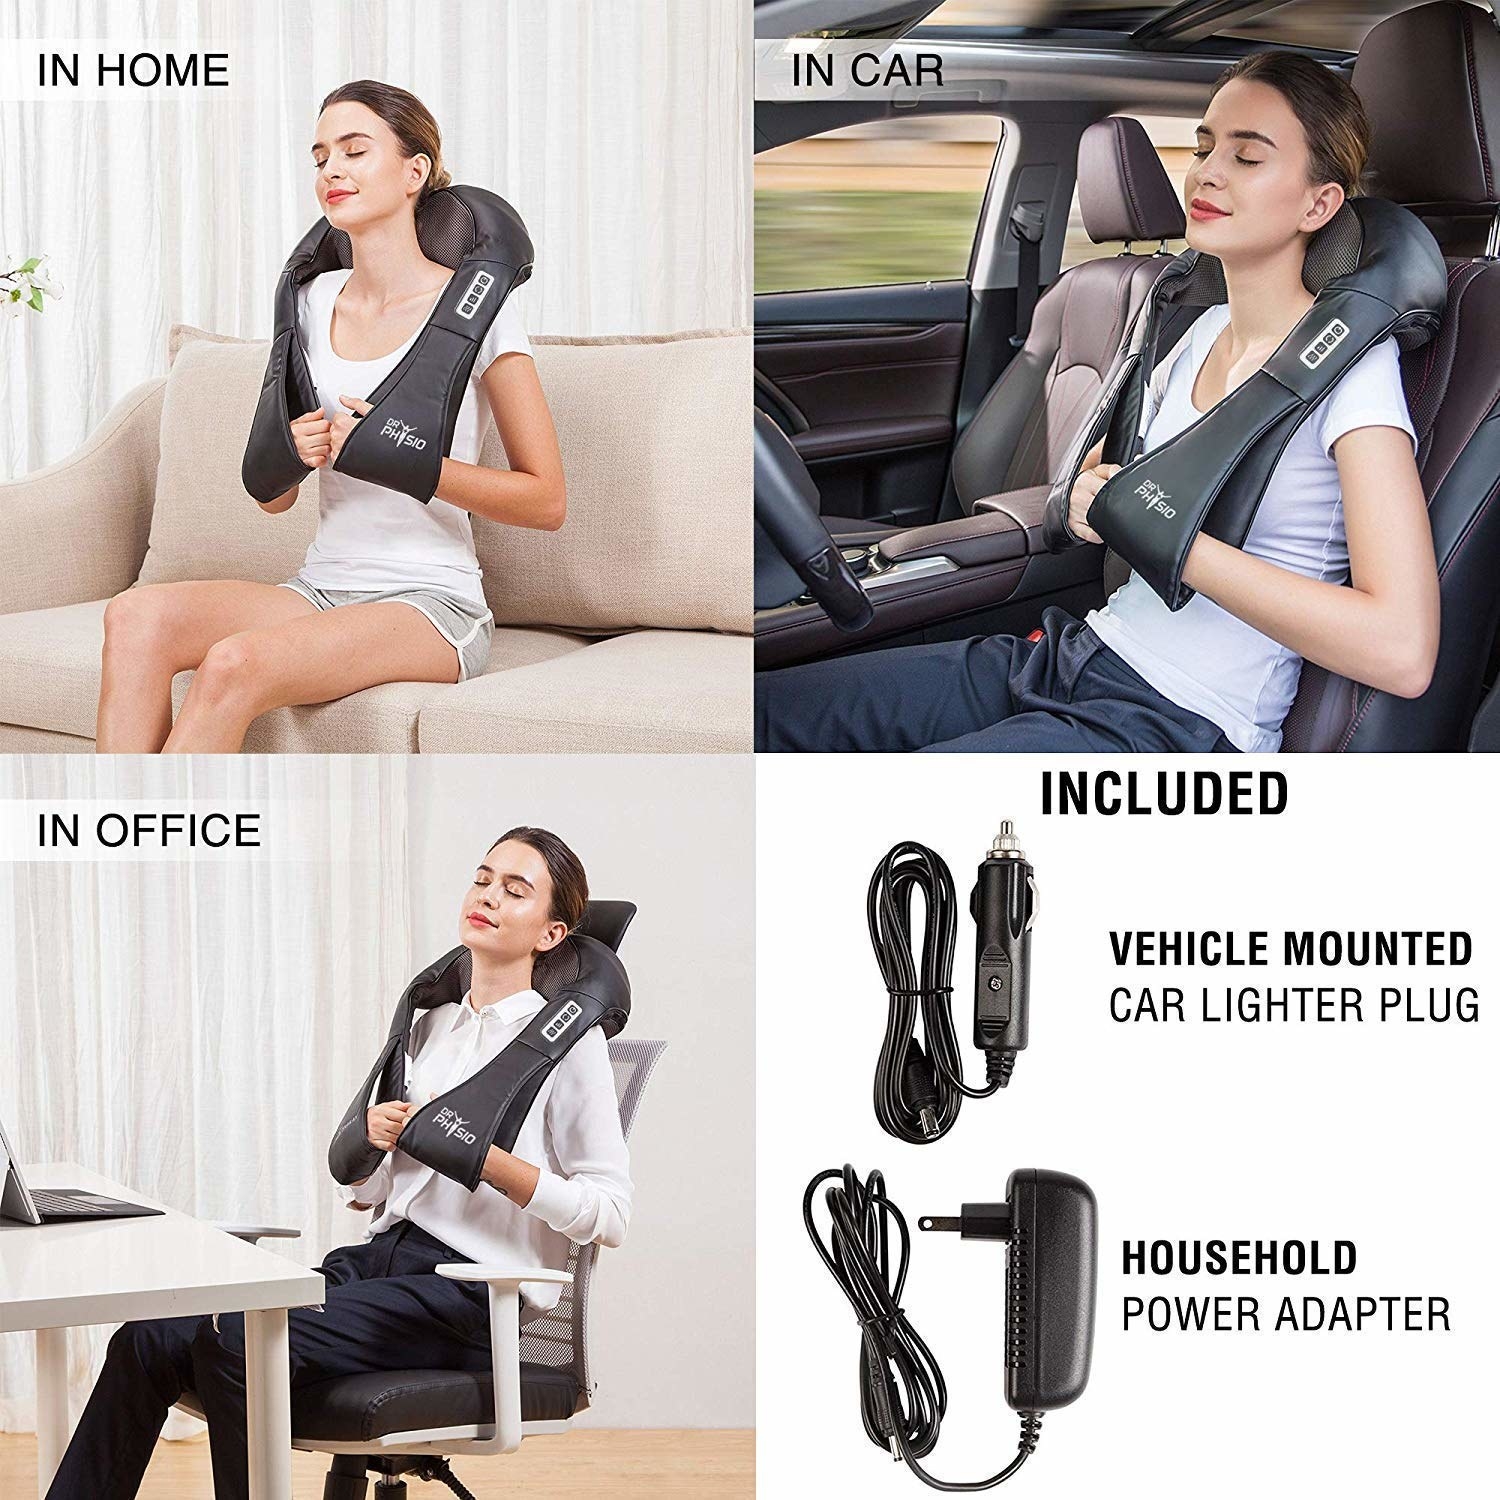 A collage of images showing various situations you can use the massager in, such as at home, in the office, in the car, etc.